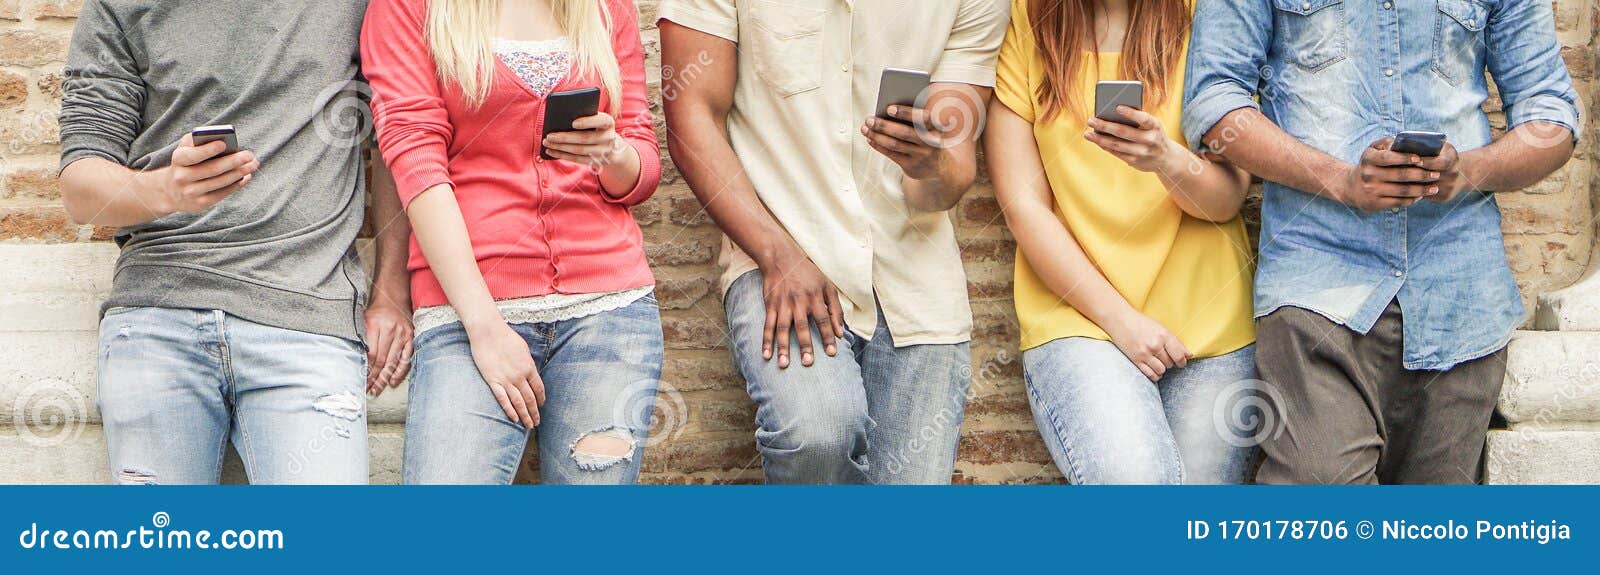 diverse culture students watching smart mobile phones in university break - young people addiction to new technology trends -